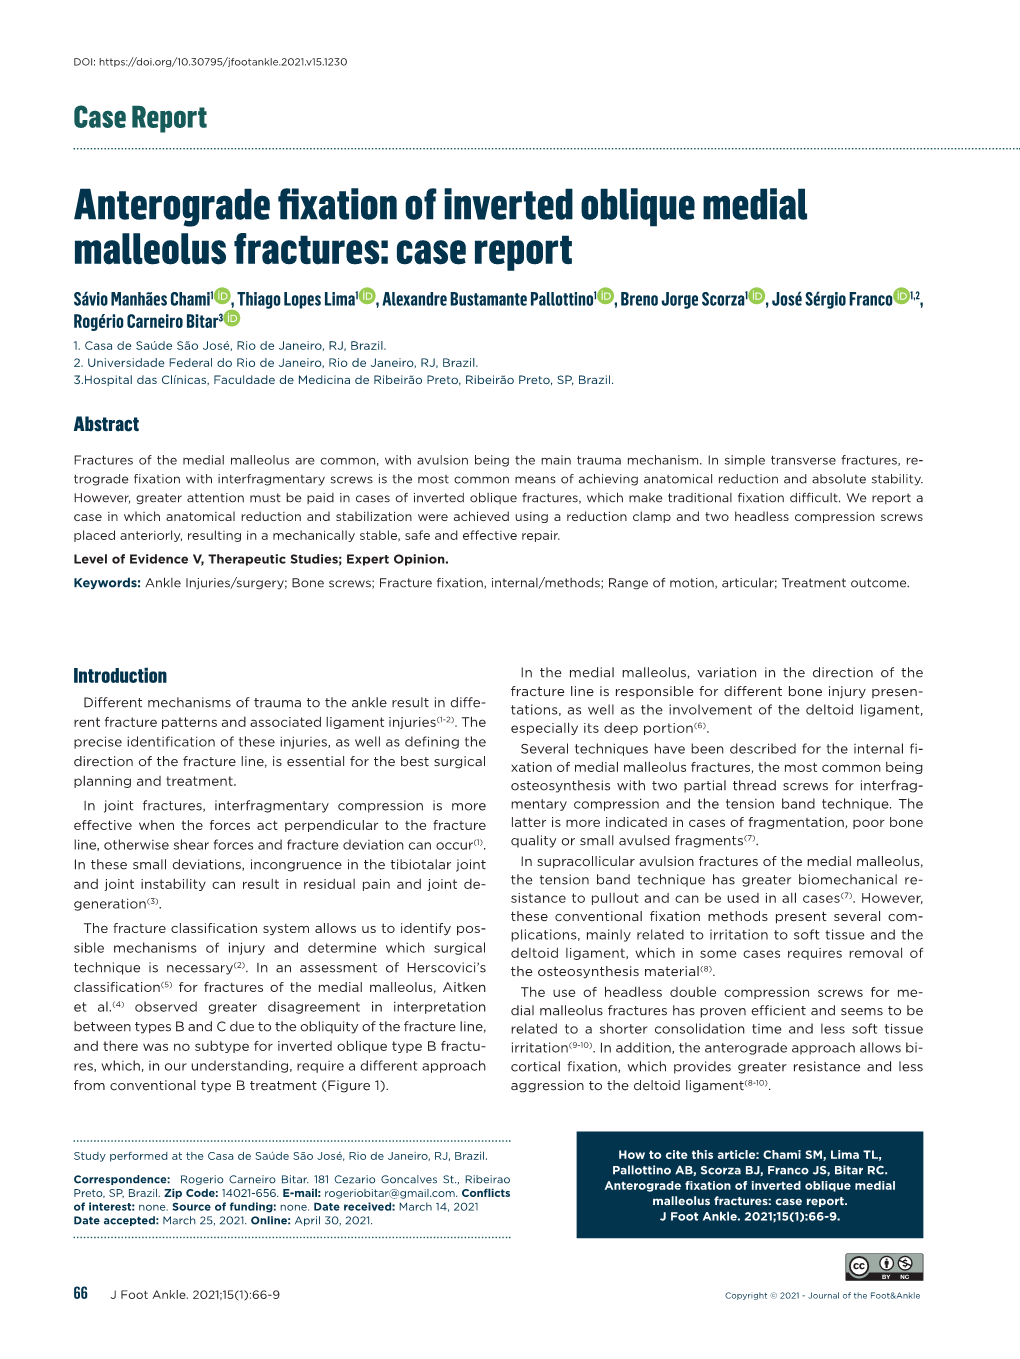 Anterograde Fixation of Inverted Oblique Medial Malleolus Fractures